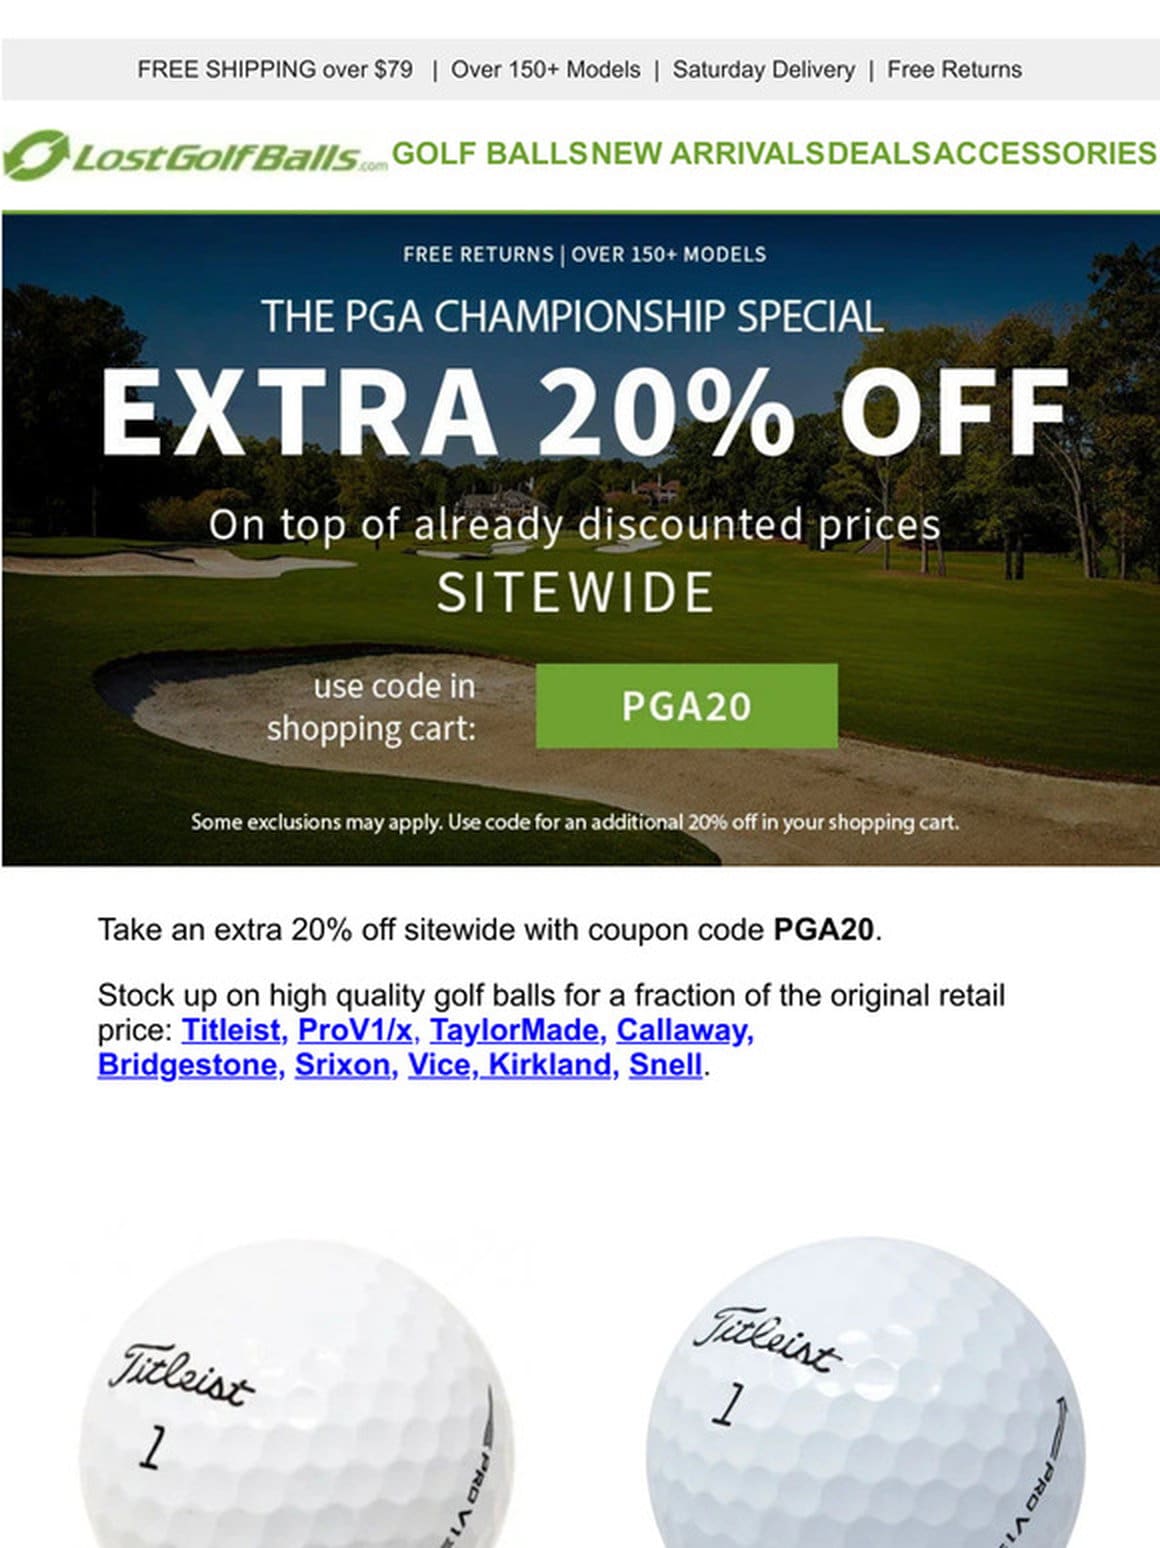 The PGA Extra 20% Off Sitewide Exclusive Offer